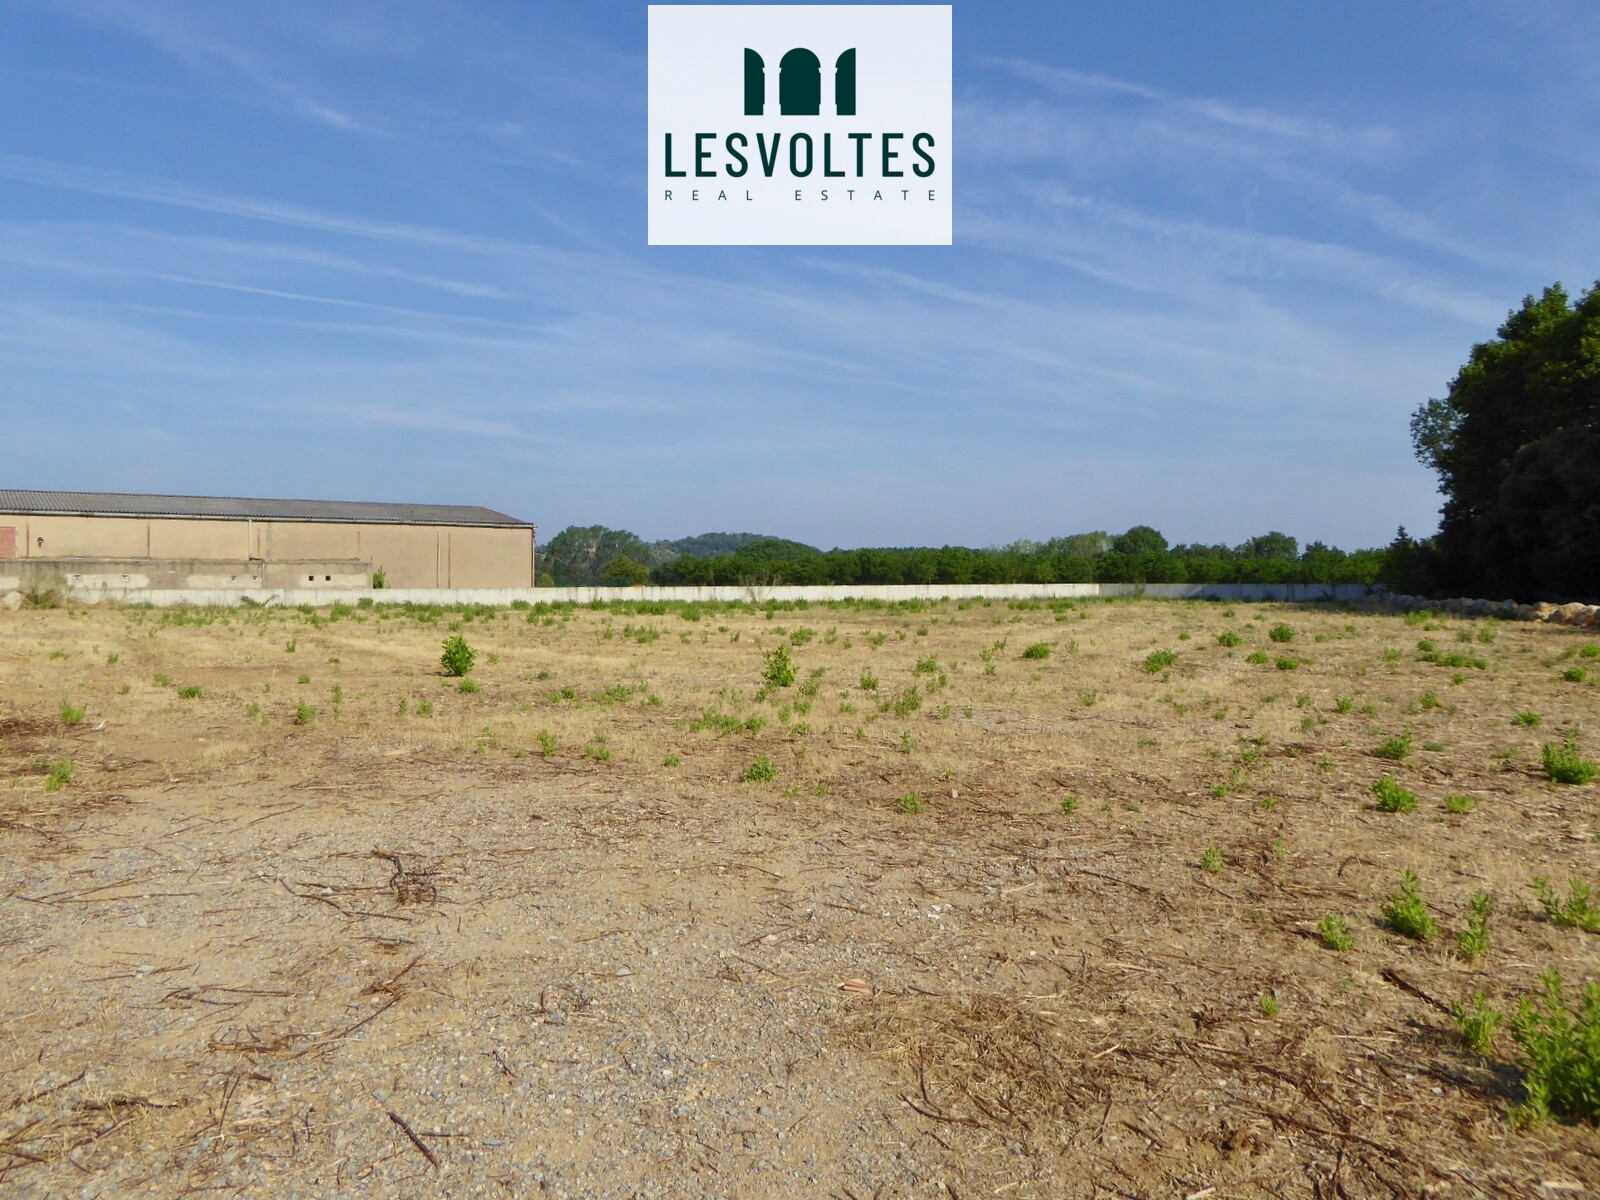  LARGE INDUSTRIAL PLOT FOR RENT IN VULPELLAC, INDUSTRIAL ESTATE. POSSIBILITY OF PURCHASE.